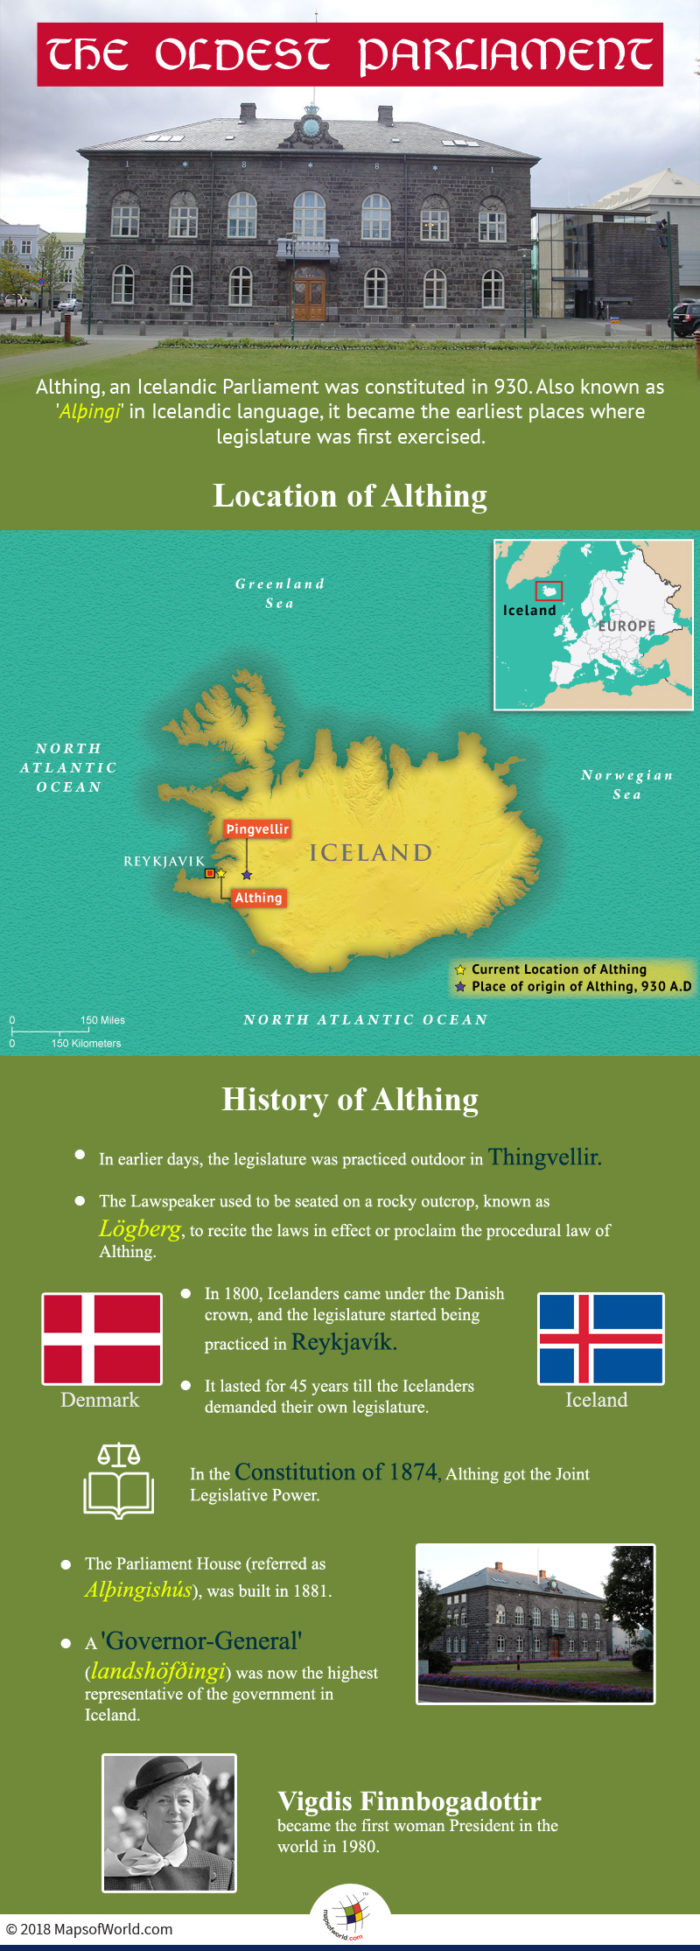 Althing, an Icelandic Parliament is the Oldest in the World